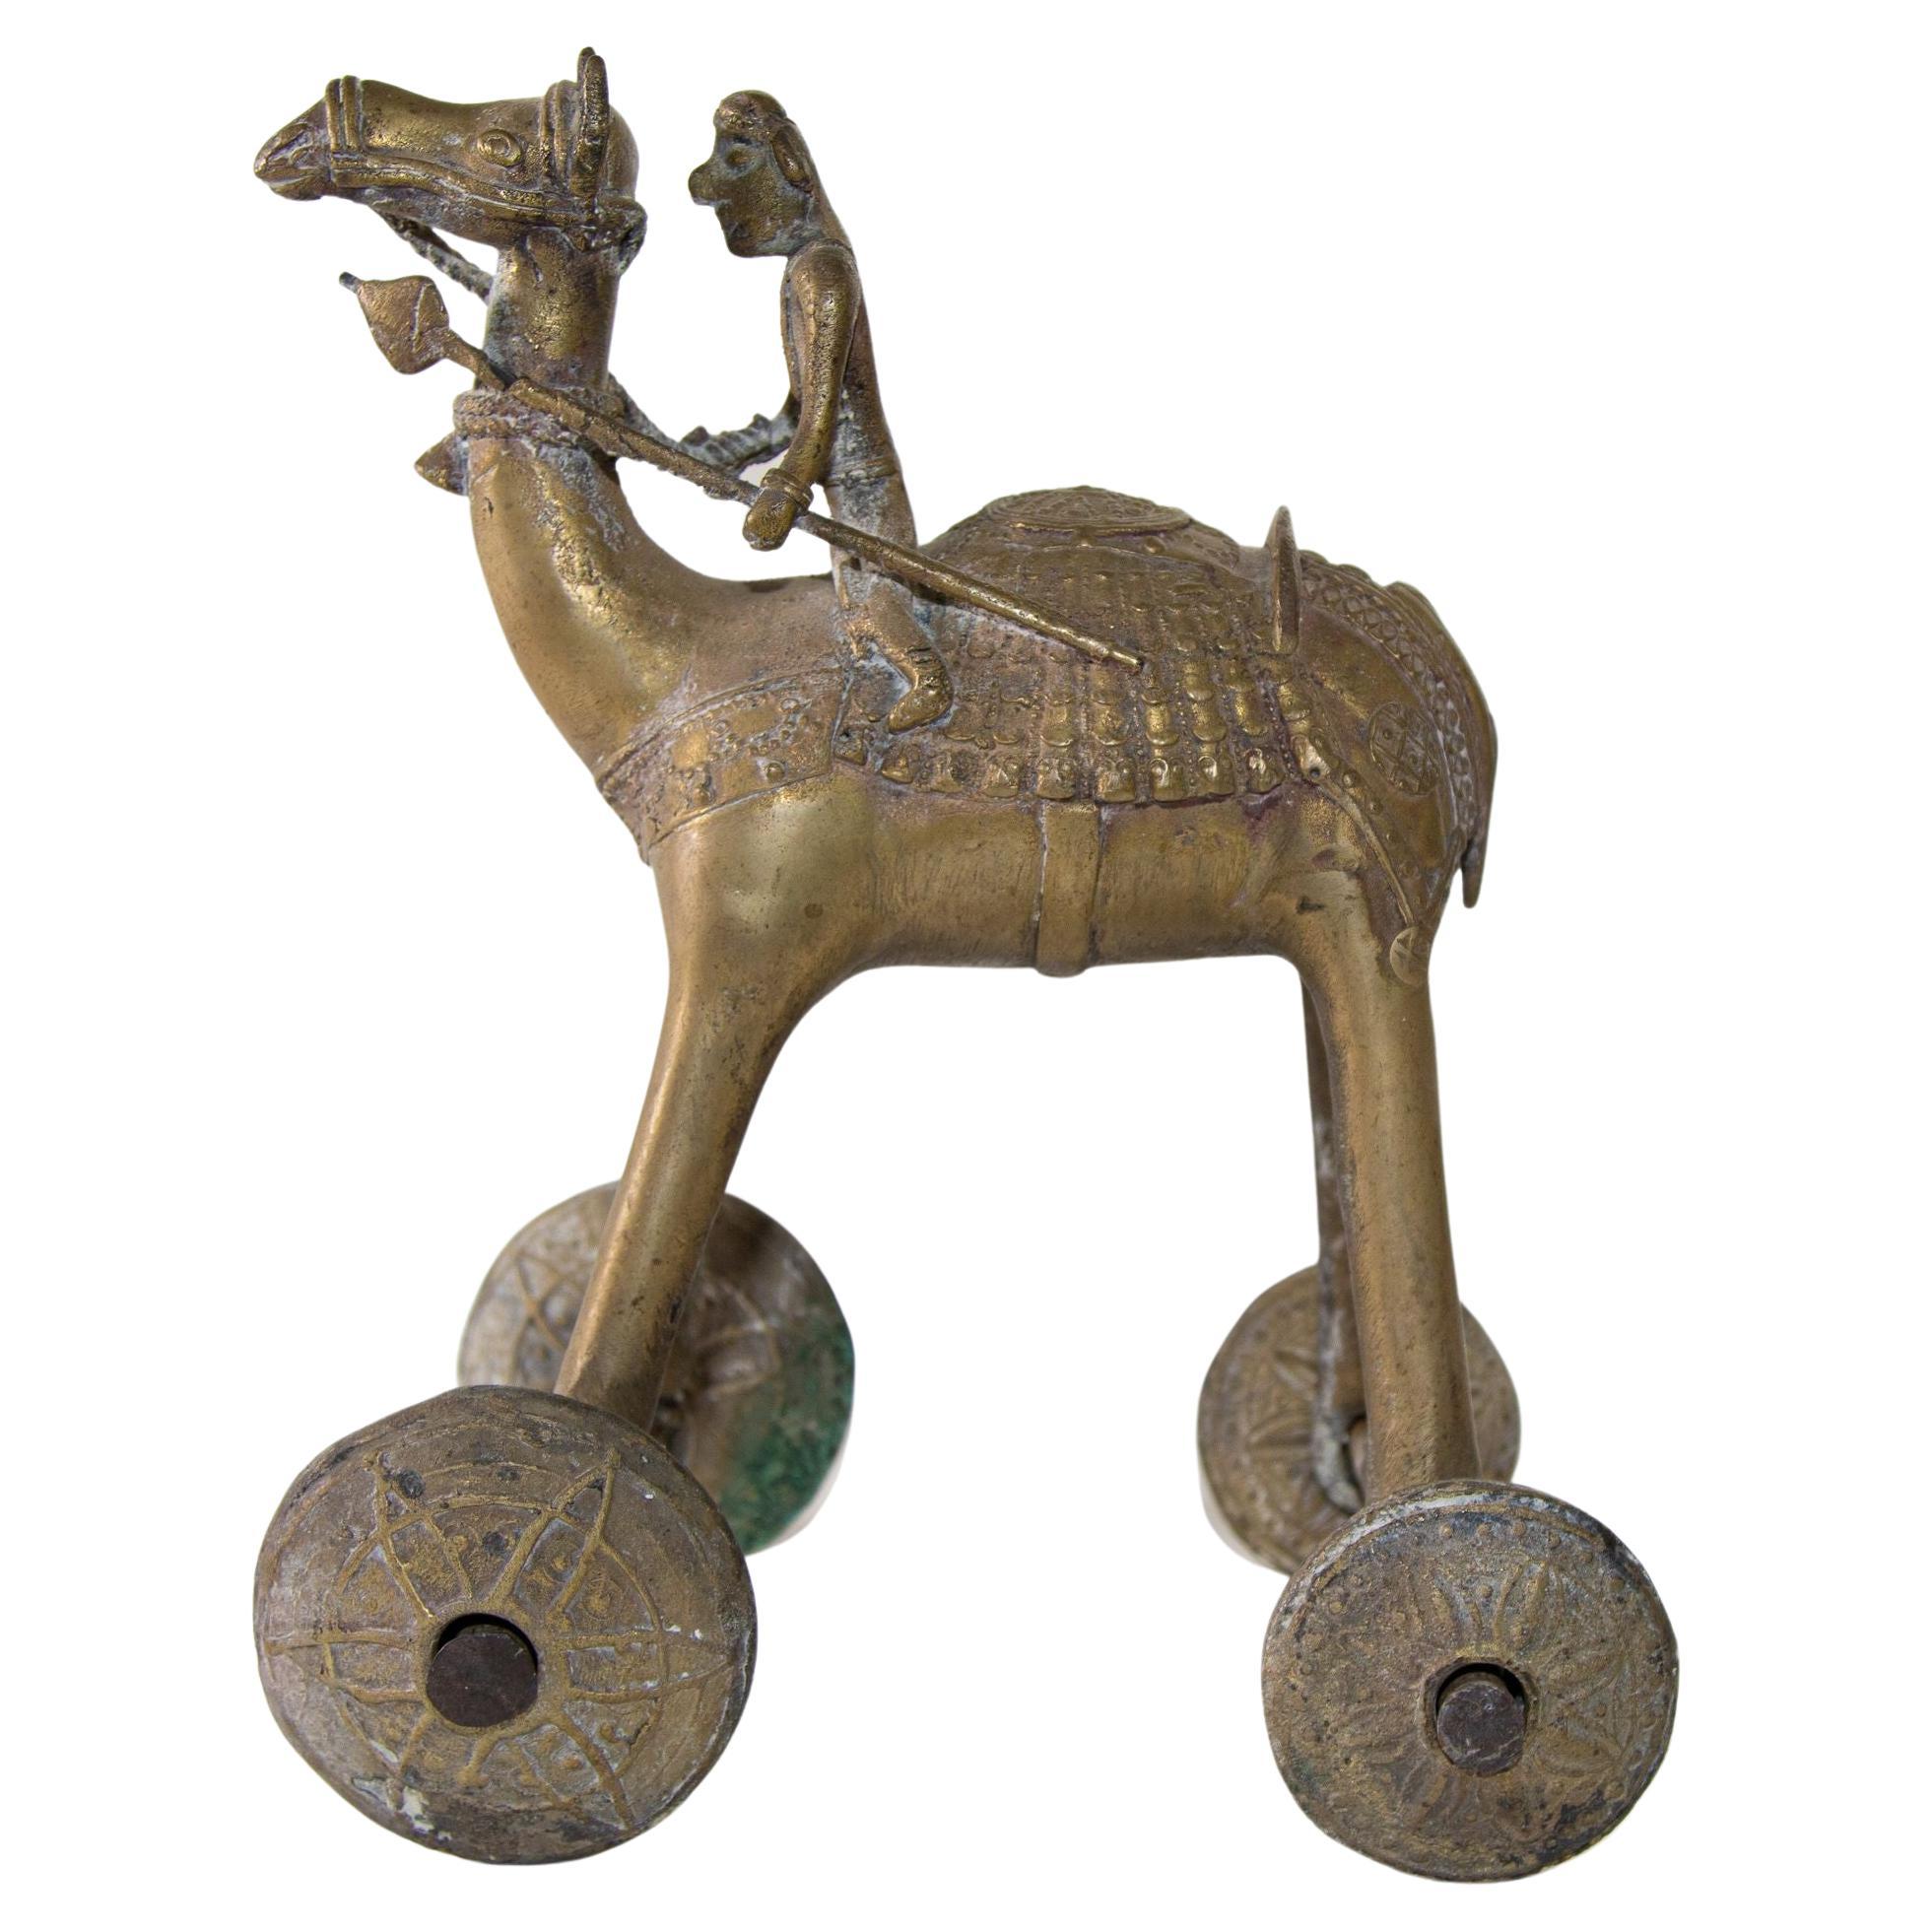 Antique Asian Bronze Large Camel Toy on Wheels 19th C